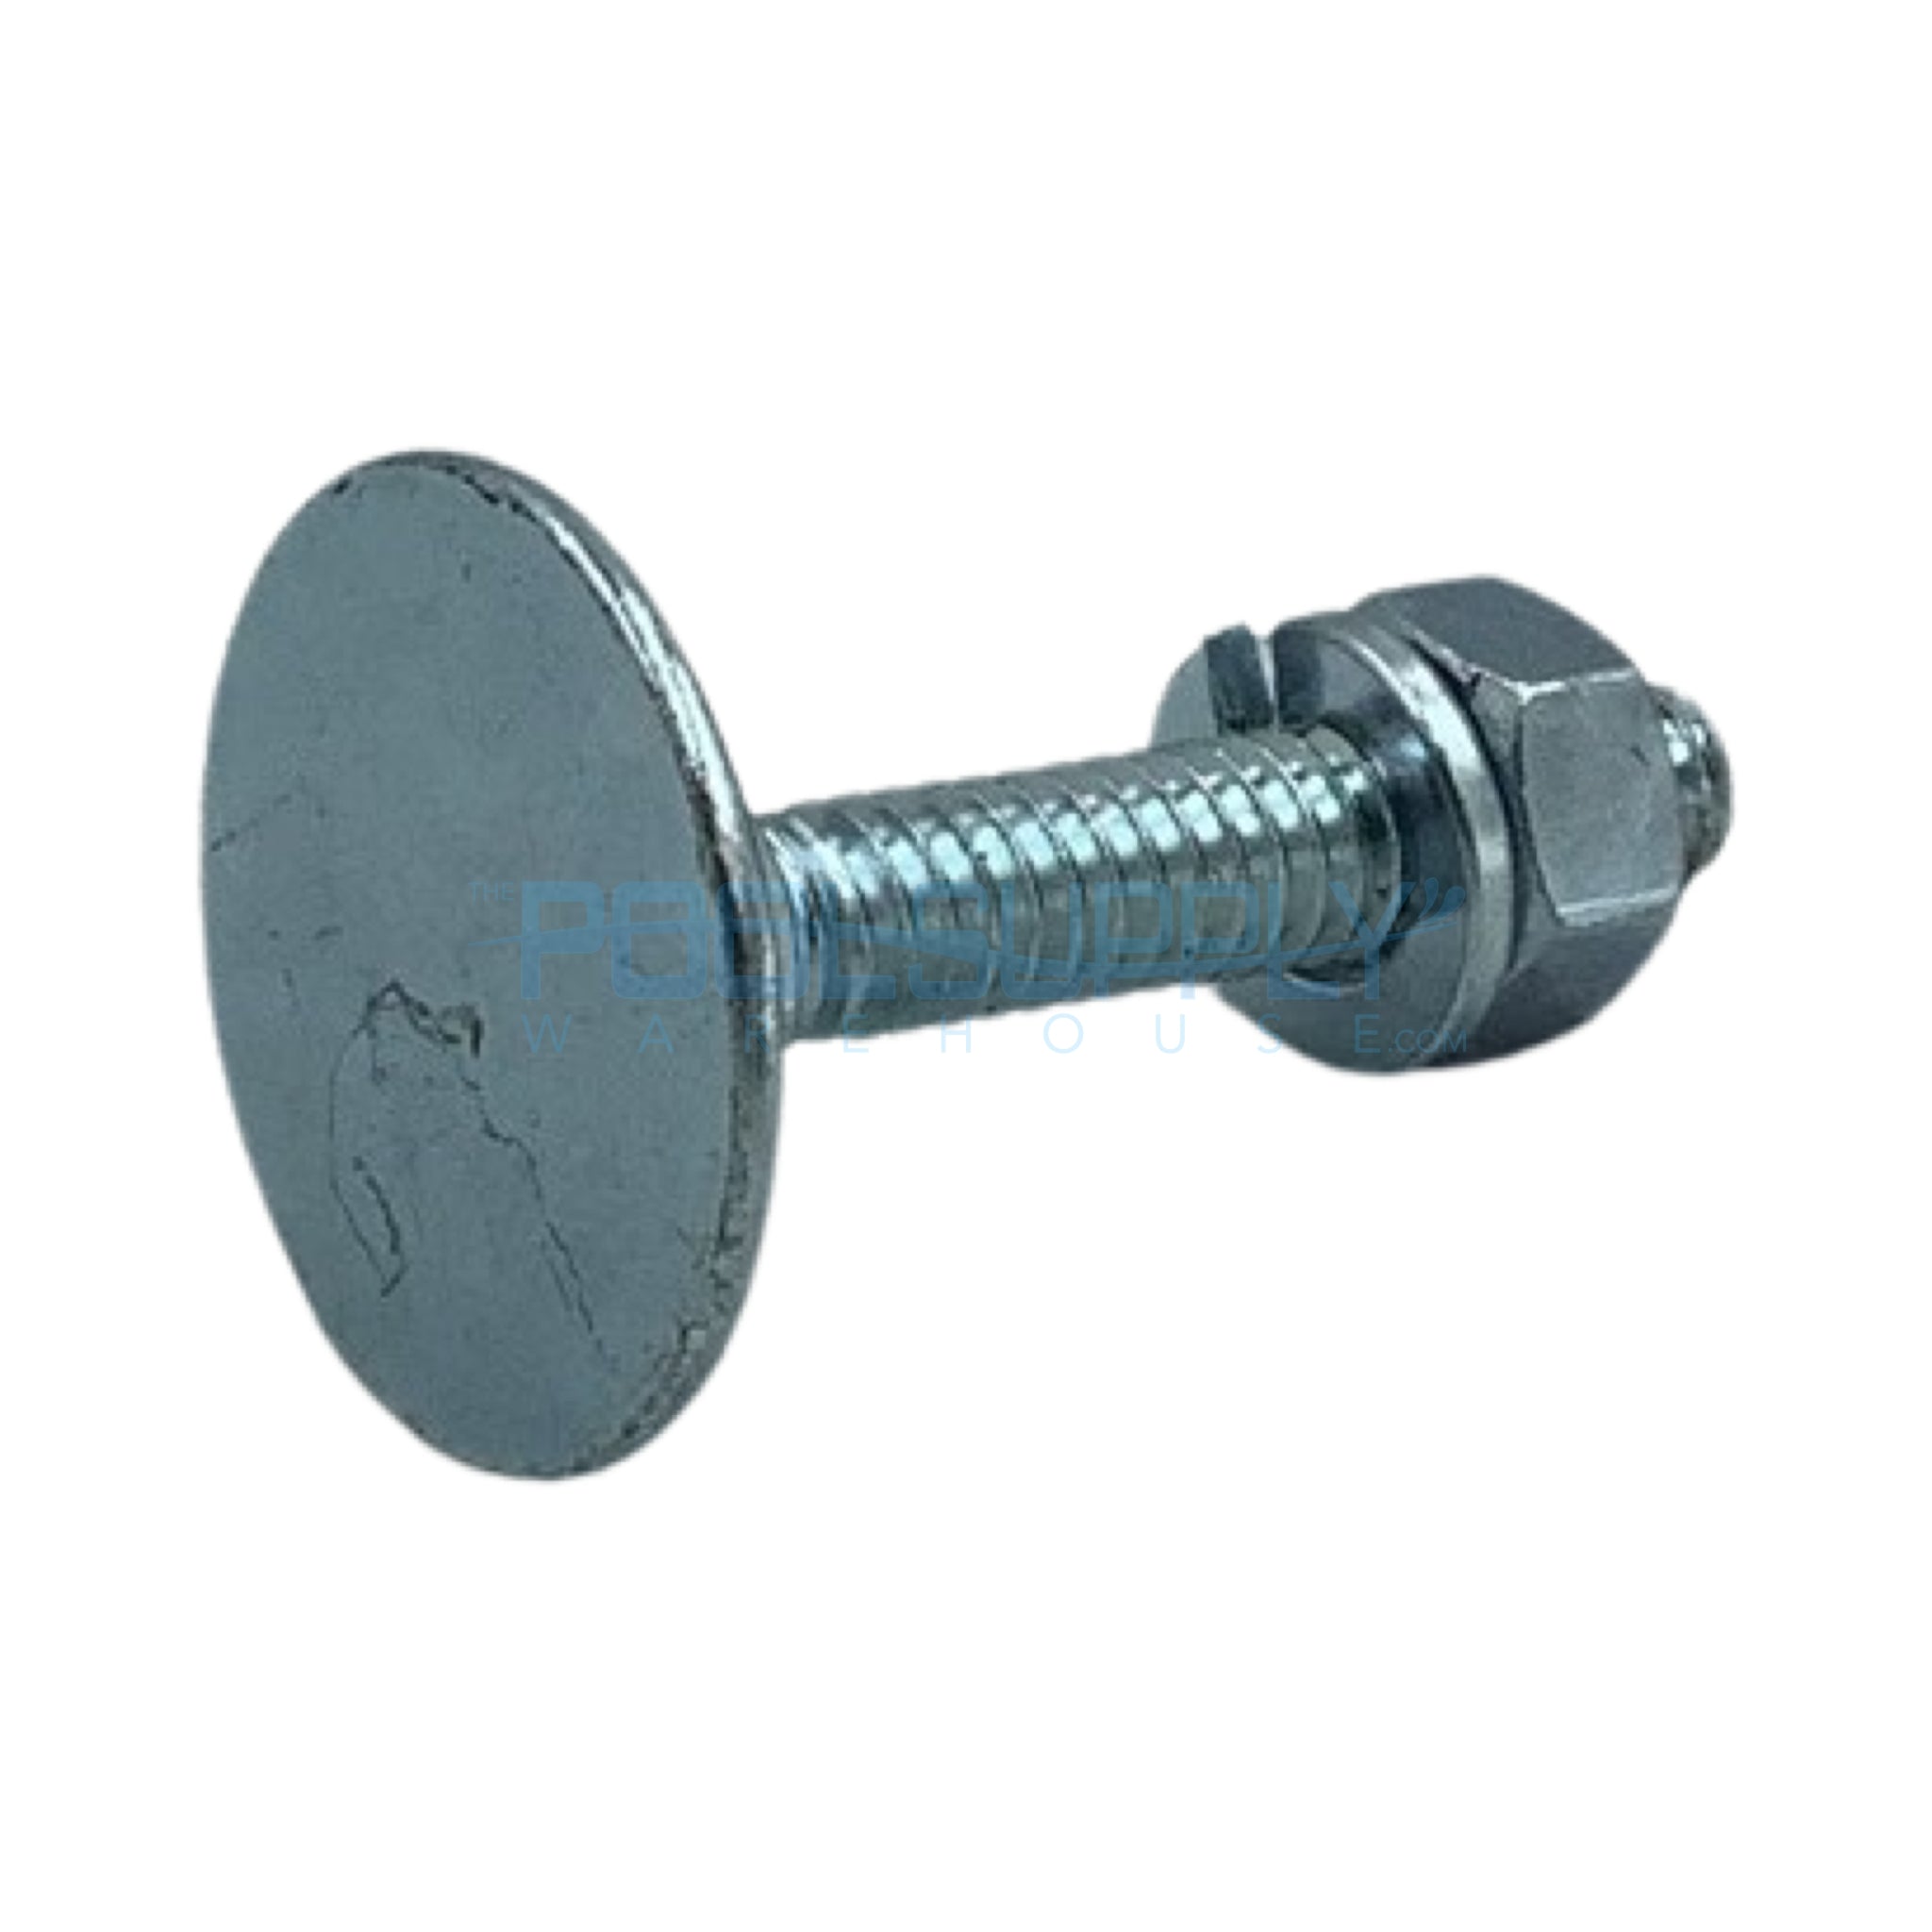 Macalite Equipment Elevator Bolt With Nut & Washer - MC305 - The Pool Supply Warehouse